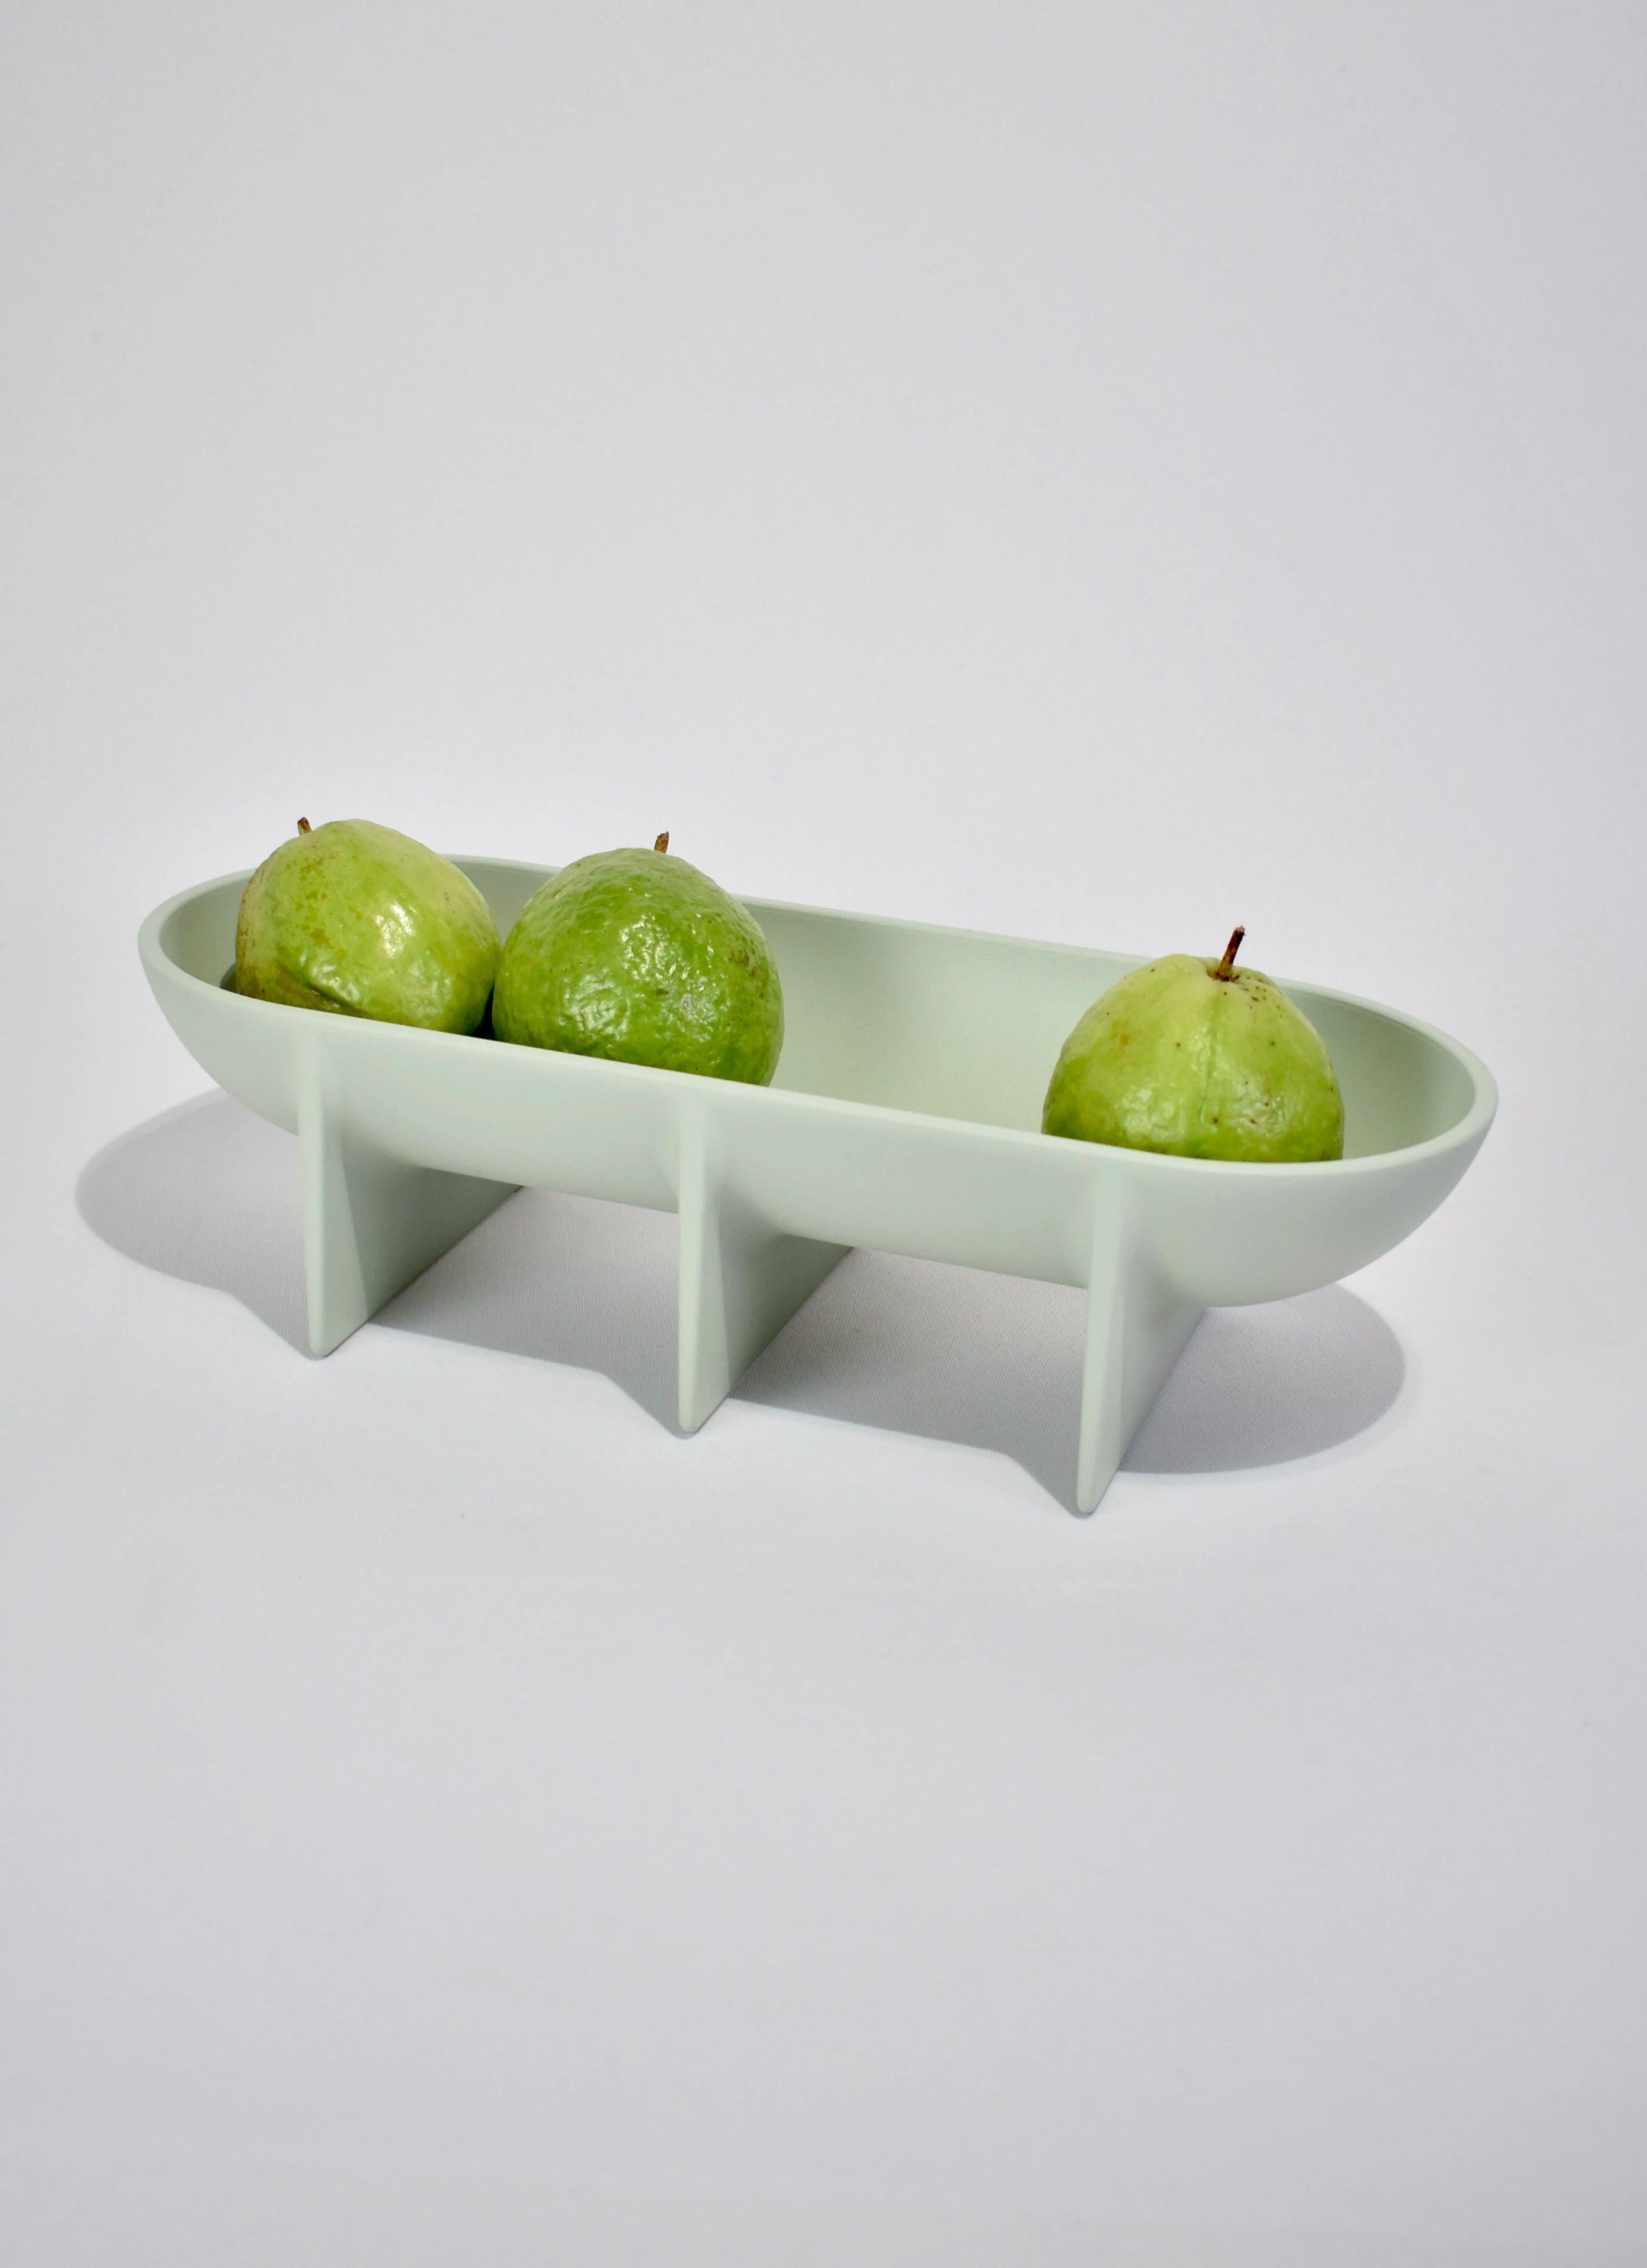 Stunning, large footed bowl in sage by FS Objects. Place as a centerpiece on your favorite table or enjoy in the kitchen as a special fruit bowl.

The die cast aluminum standing bowl is elevated off the table surface by its architecturally